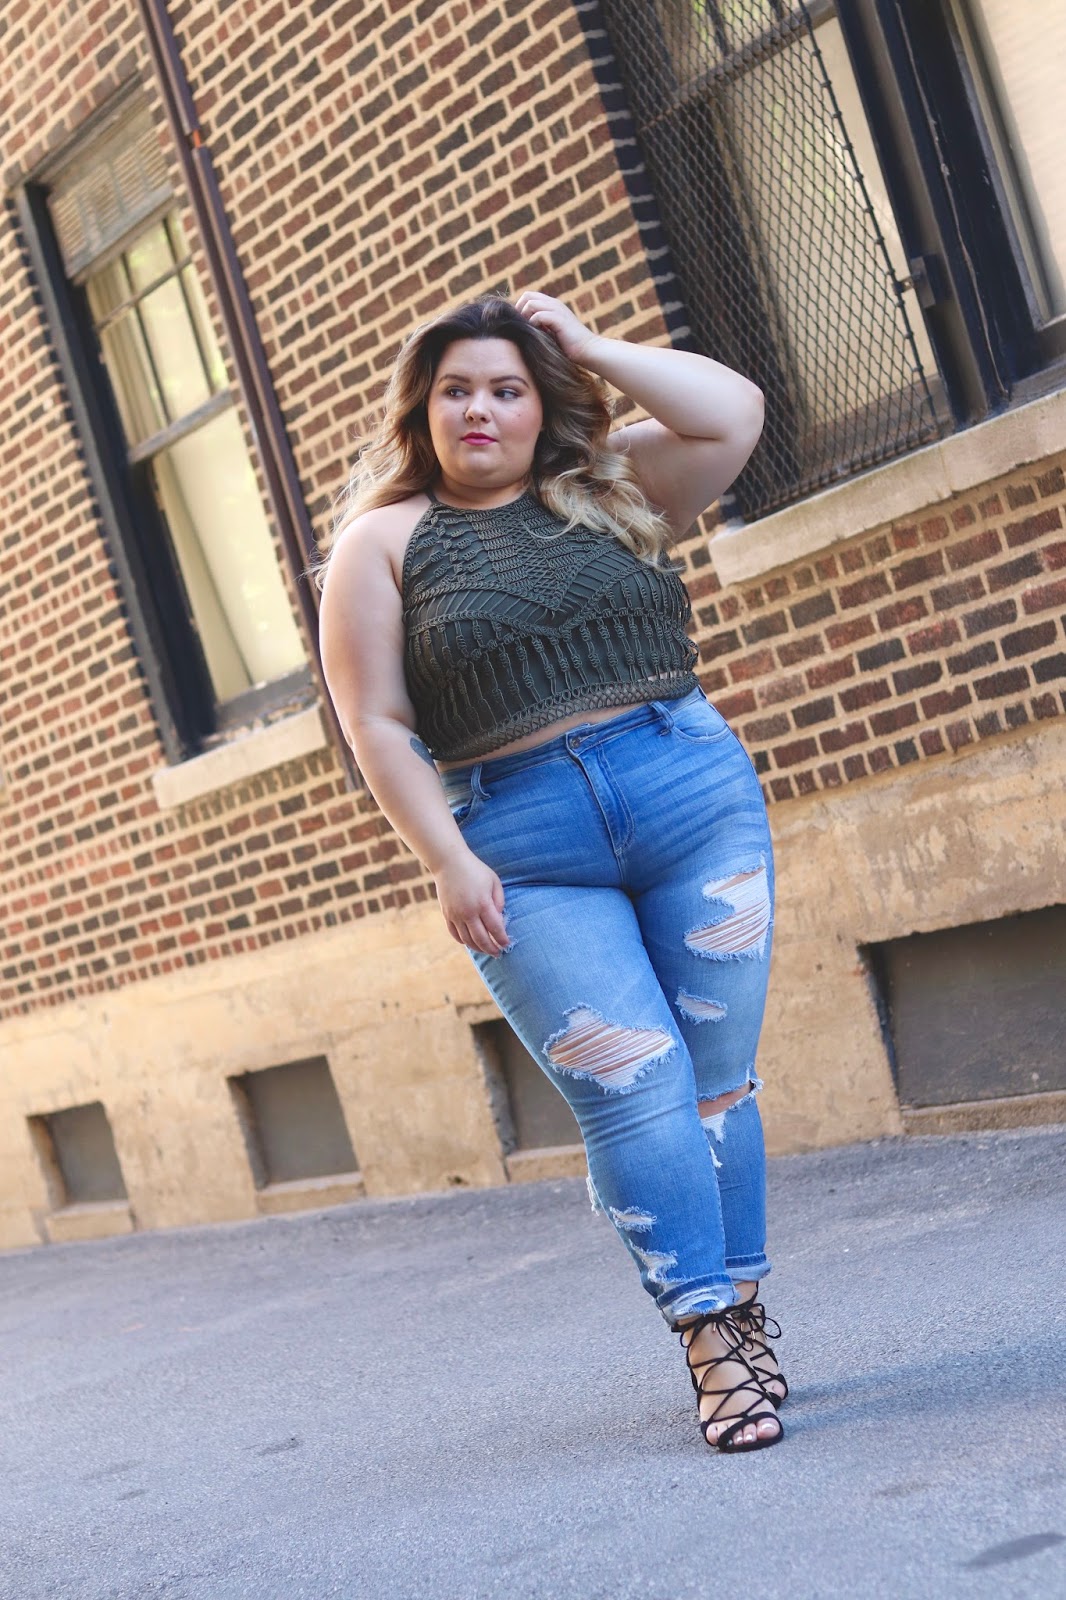 cello jeans, affordable plus size denim, plus size jeans, affordable plus size clothing, H&M plus sizes, how to hide my stomach pouch, plus size fashion blogger, Chicago blogger, natalie in the city, natalie craig, sunglass up, destroyed denim, curves and confidence,